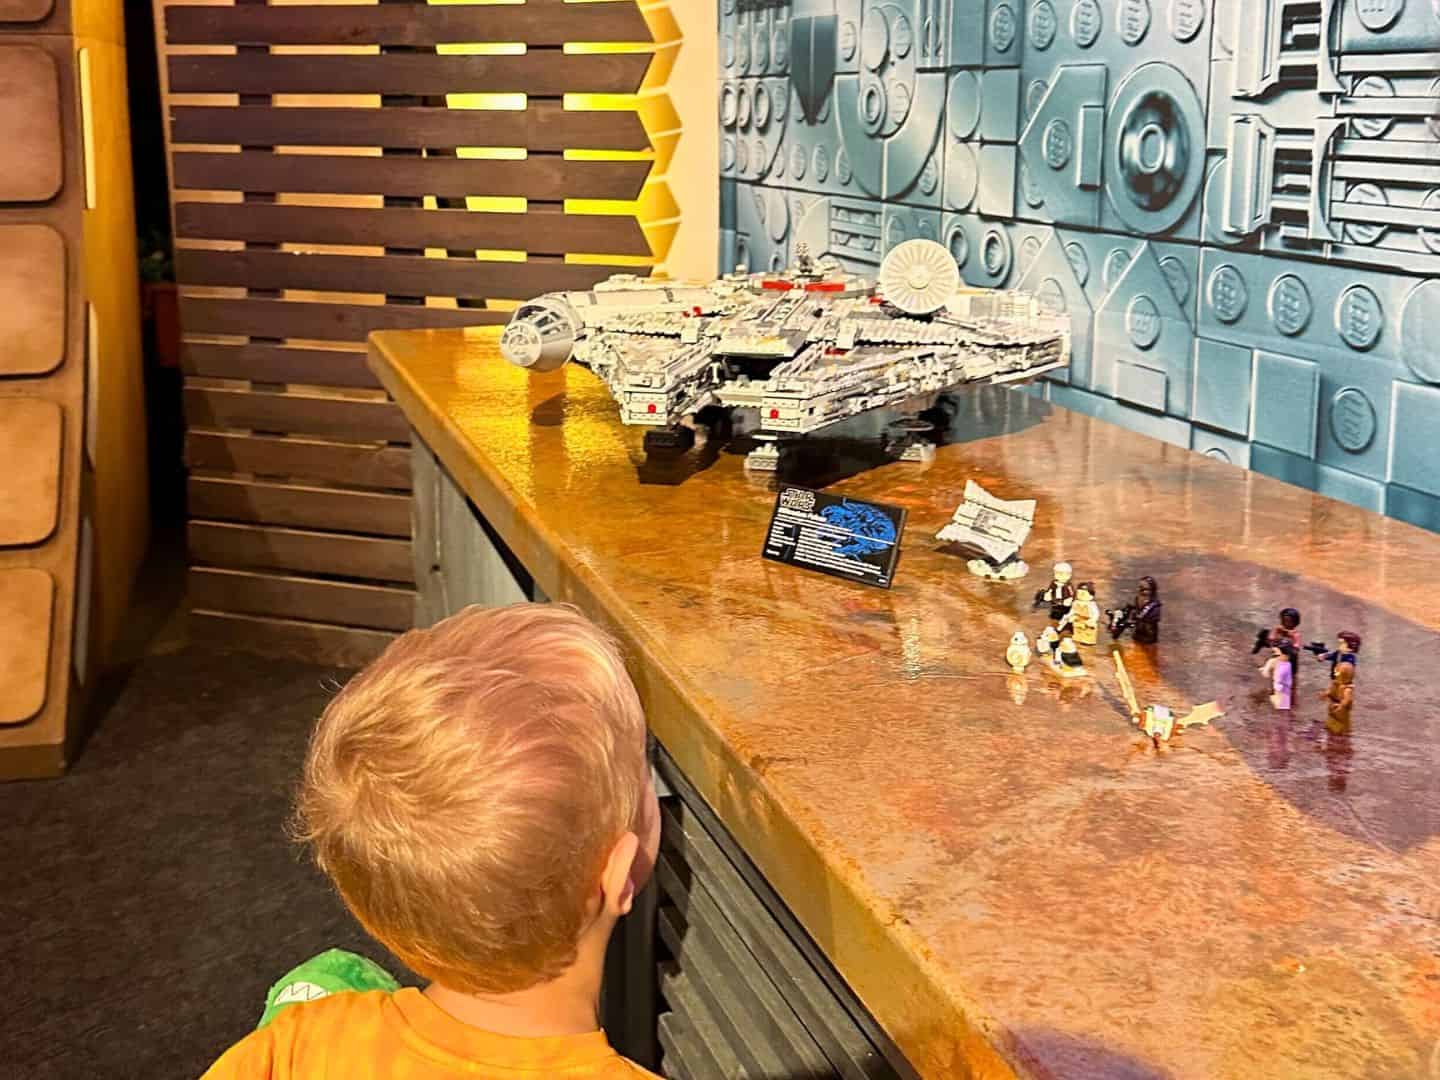 Young Boy Looks at Millennium Falcon LEGO Set 25th Anniversary - image by Dani Meyering